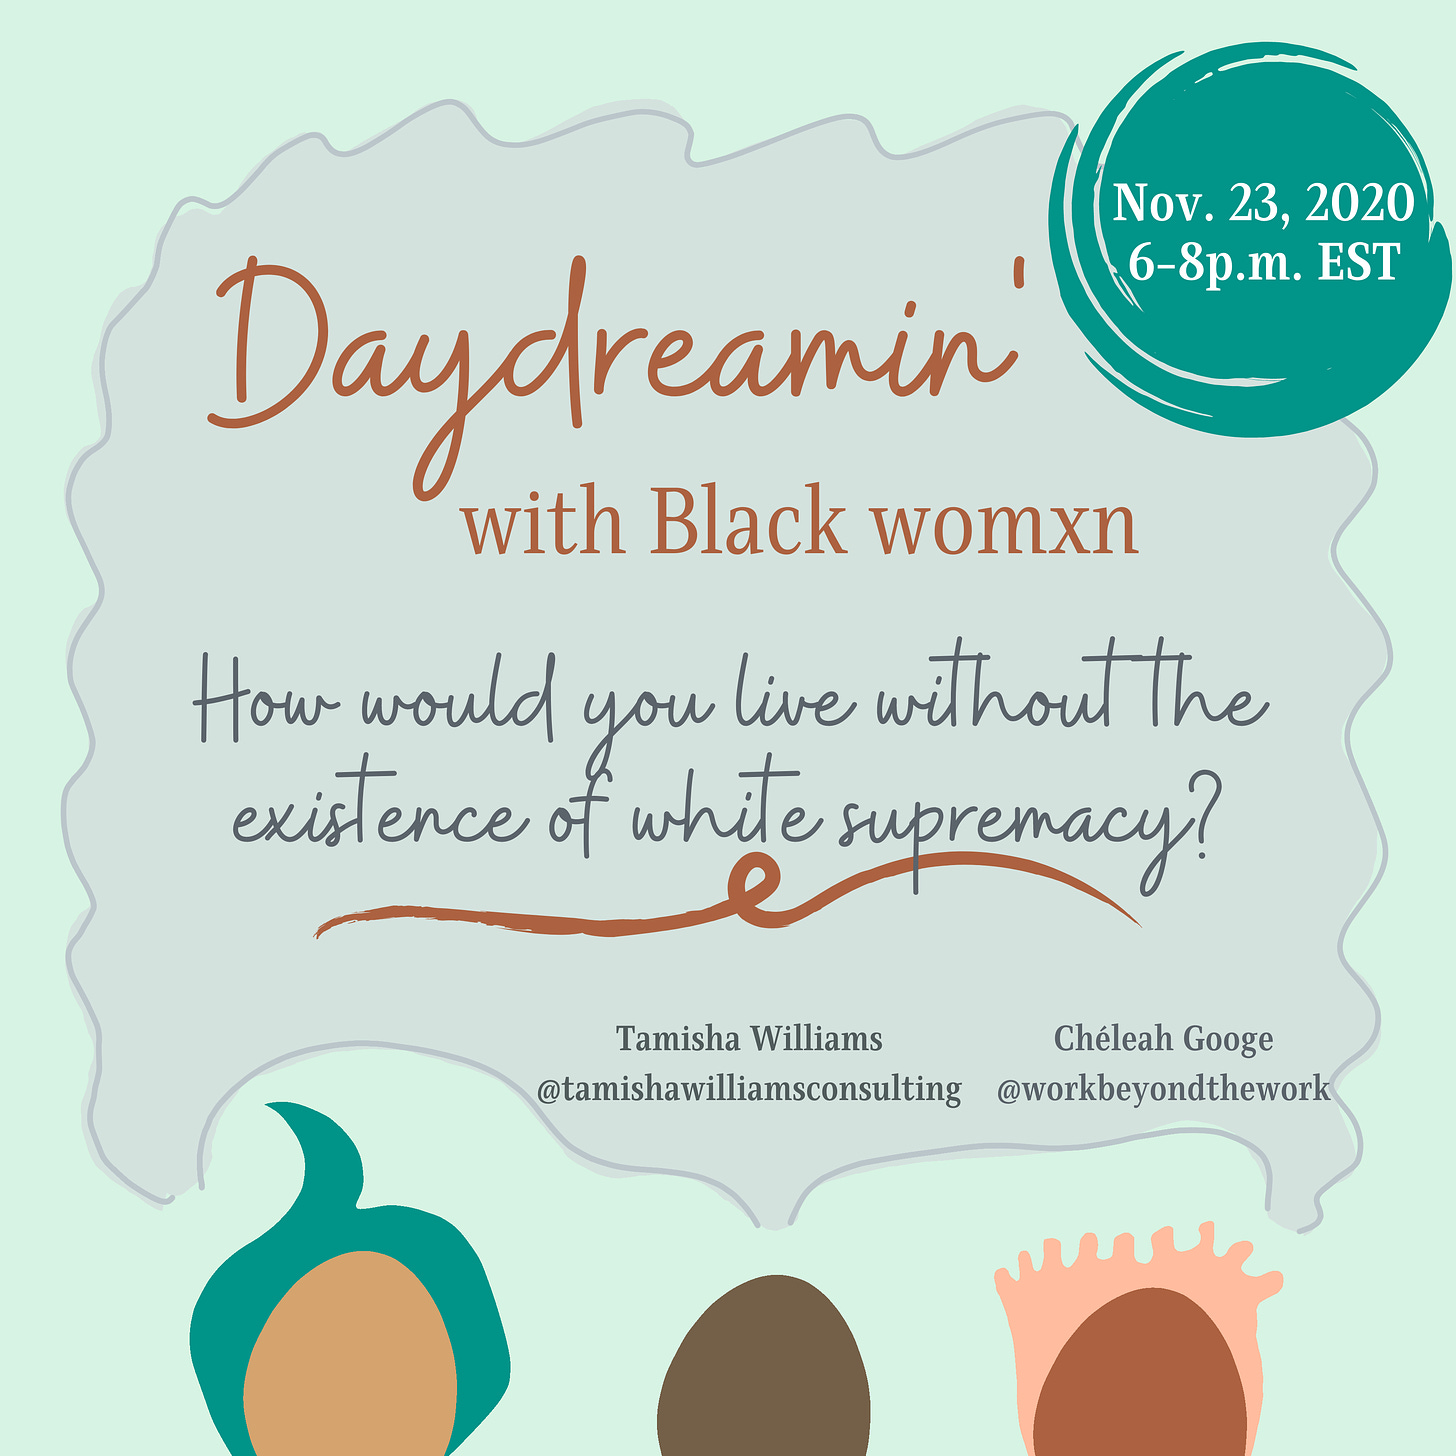 "Daydreamin' with Black womxn. How would you live without the existence of white supremacy? Tamisha Williams and Chéleah Googe.